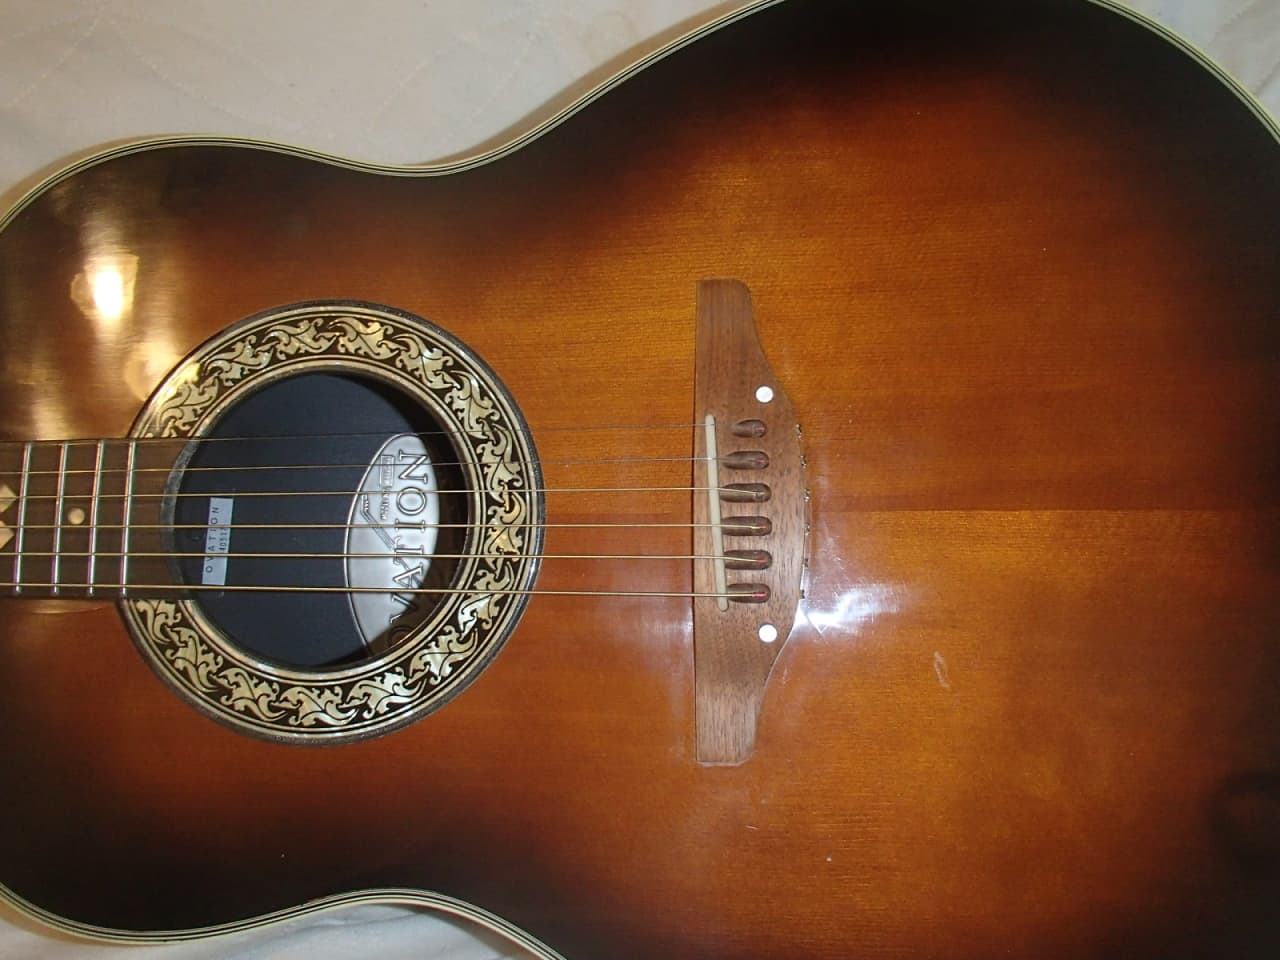 ovation applause serial numbers